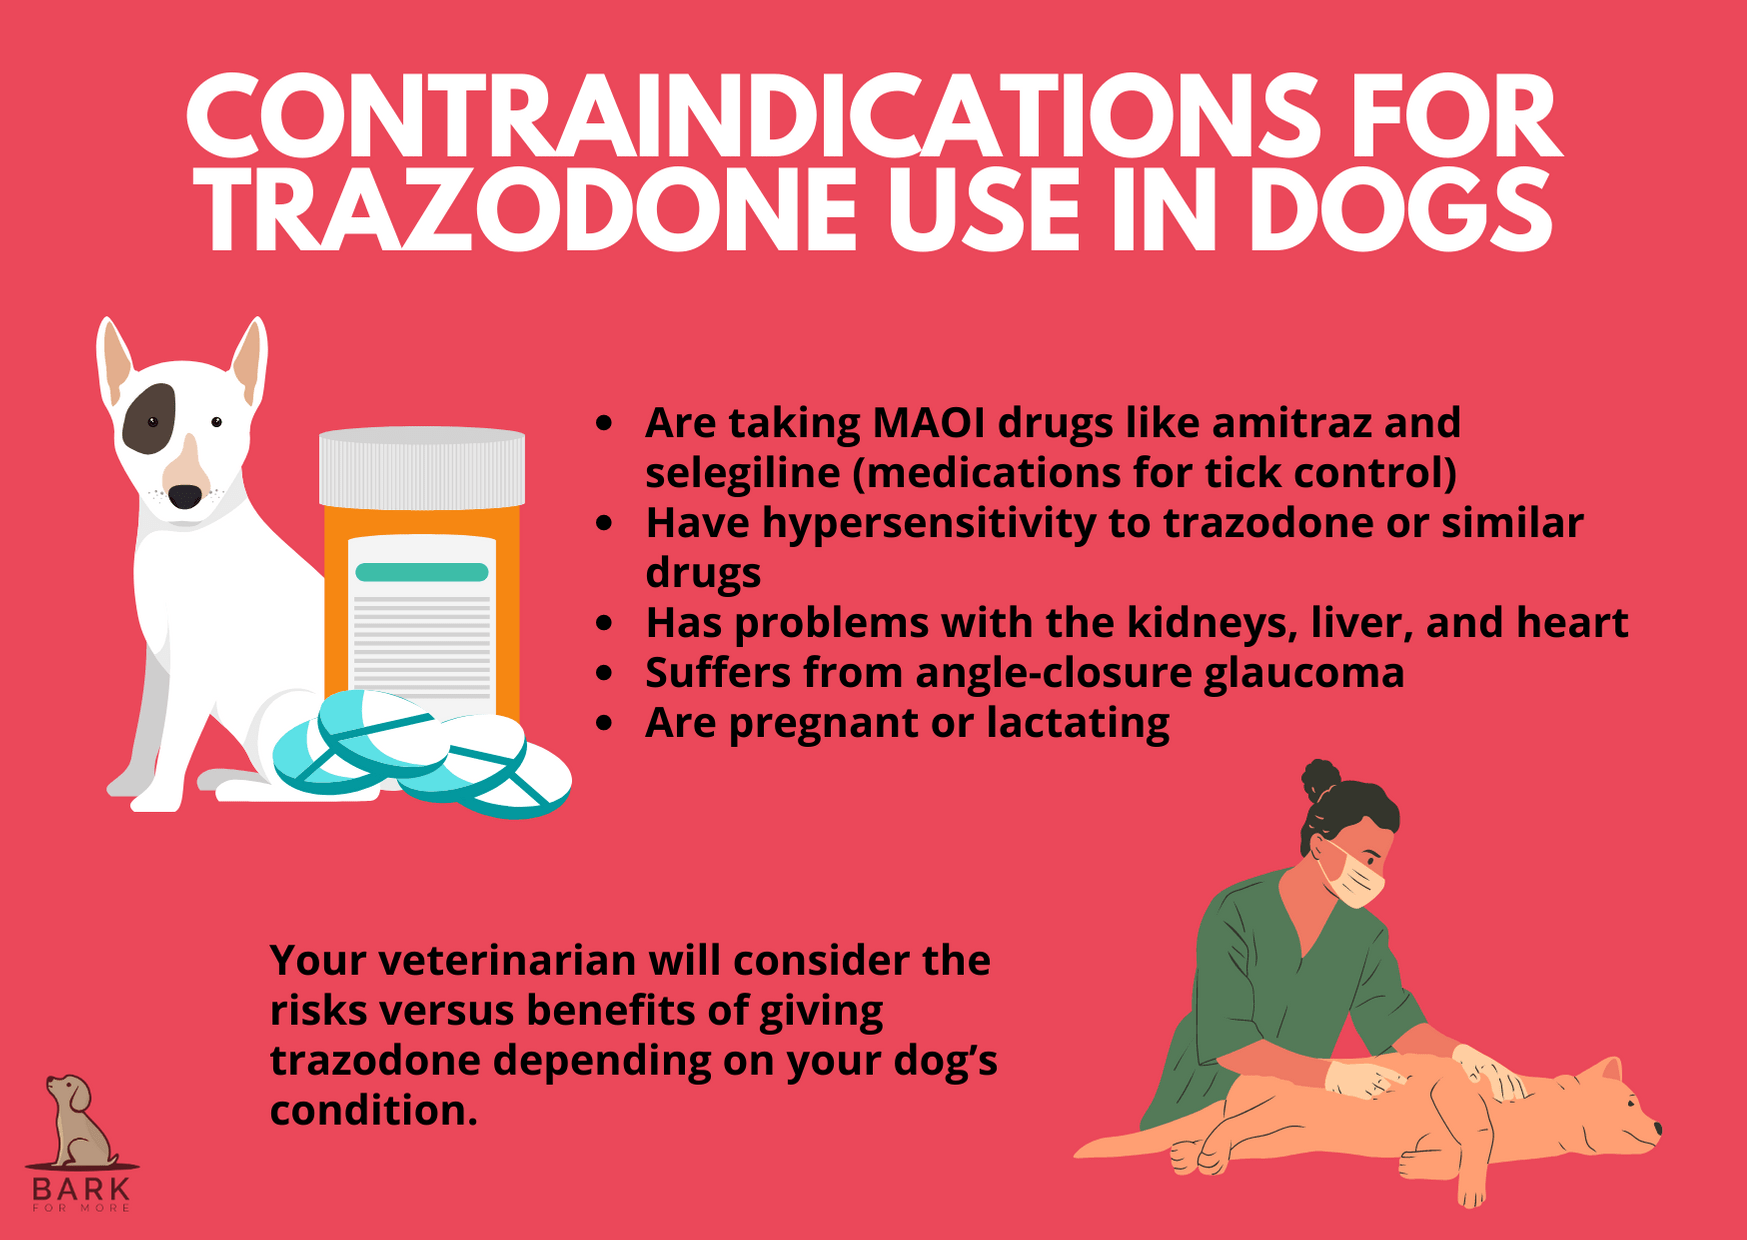 Contraindications for Trazodone Use in Dogs